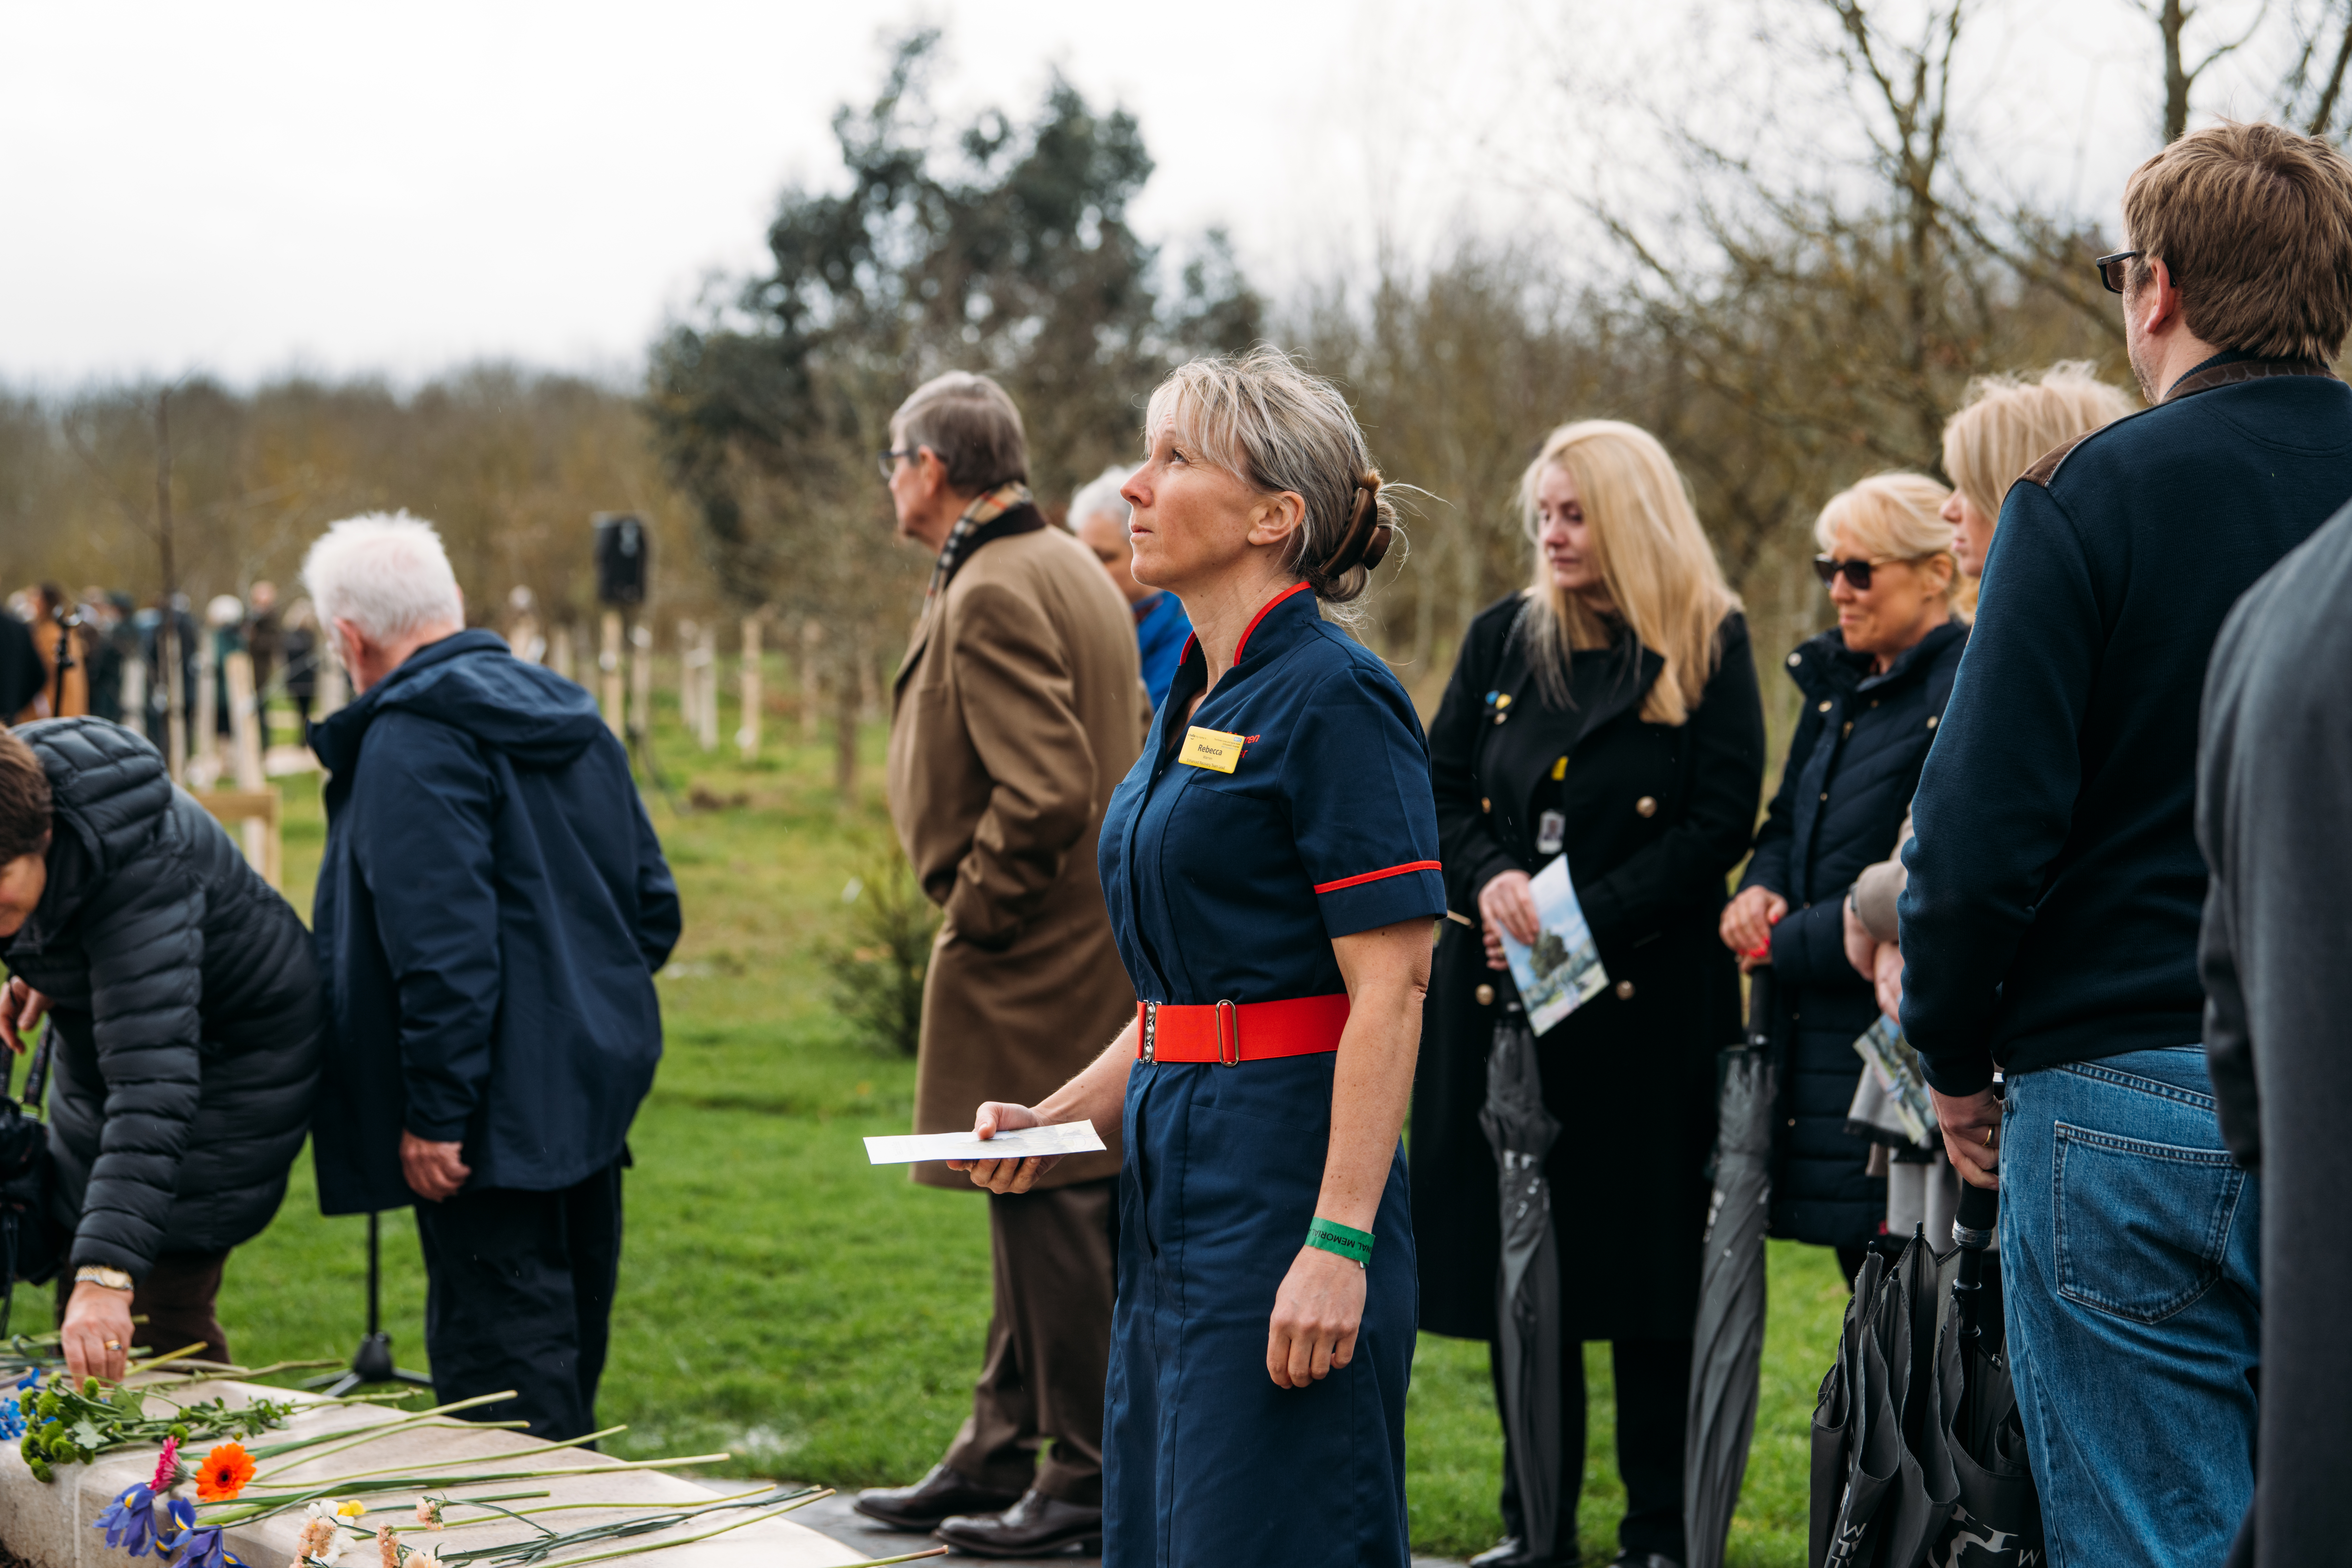 Becky Warren, an NHS nurse, attended the dedication event at the arboretum on Tuesday (National Memorial Arboretum/PA)